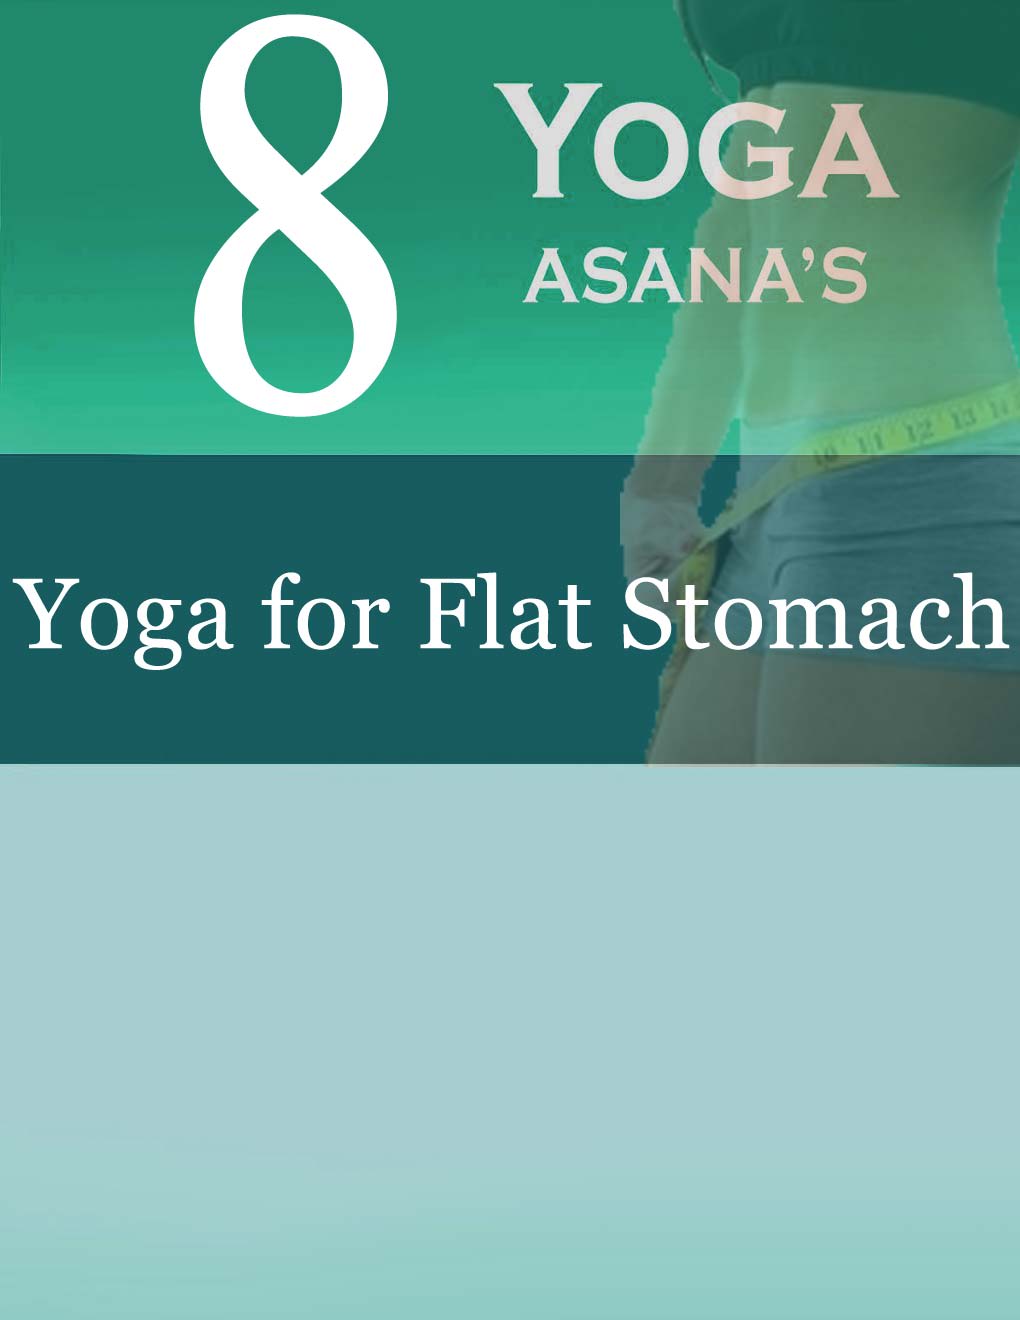 Yoga for Belly Fat: Try 12 Simple Asanas to Get Flat Stomach - Fitsri Yoga